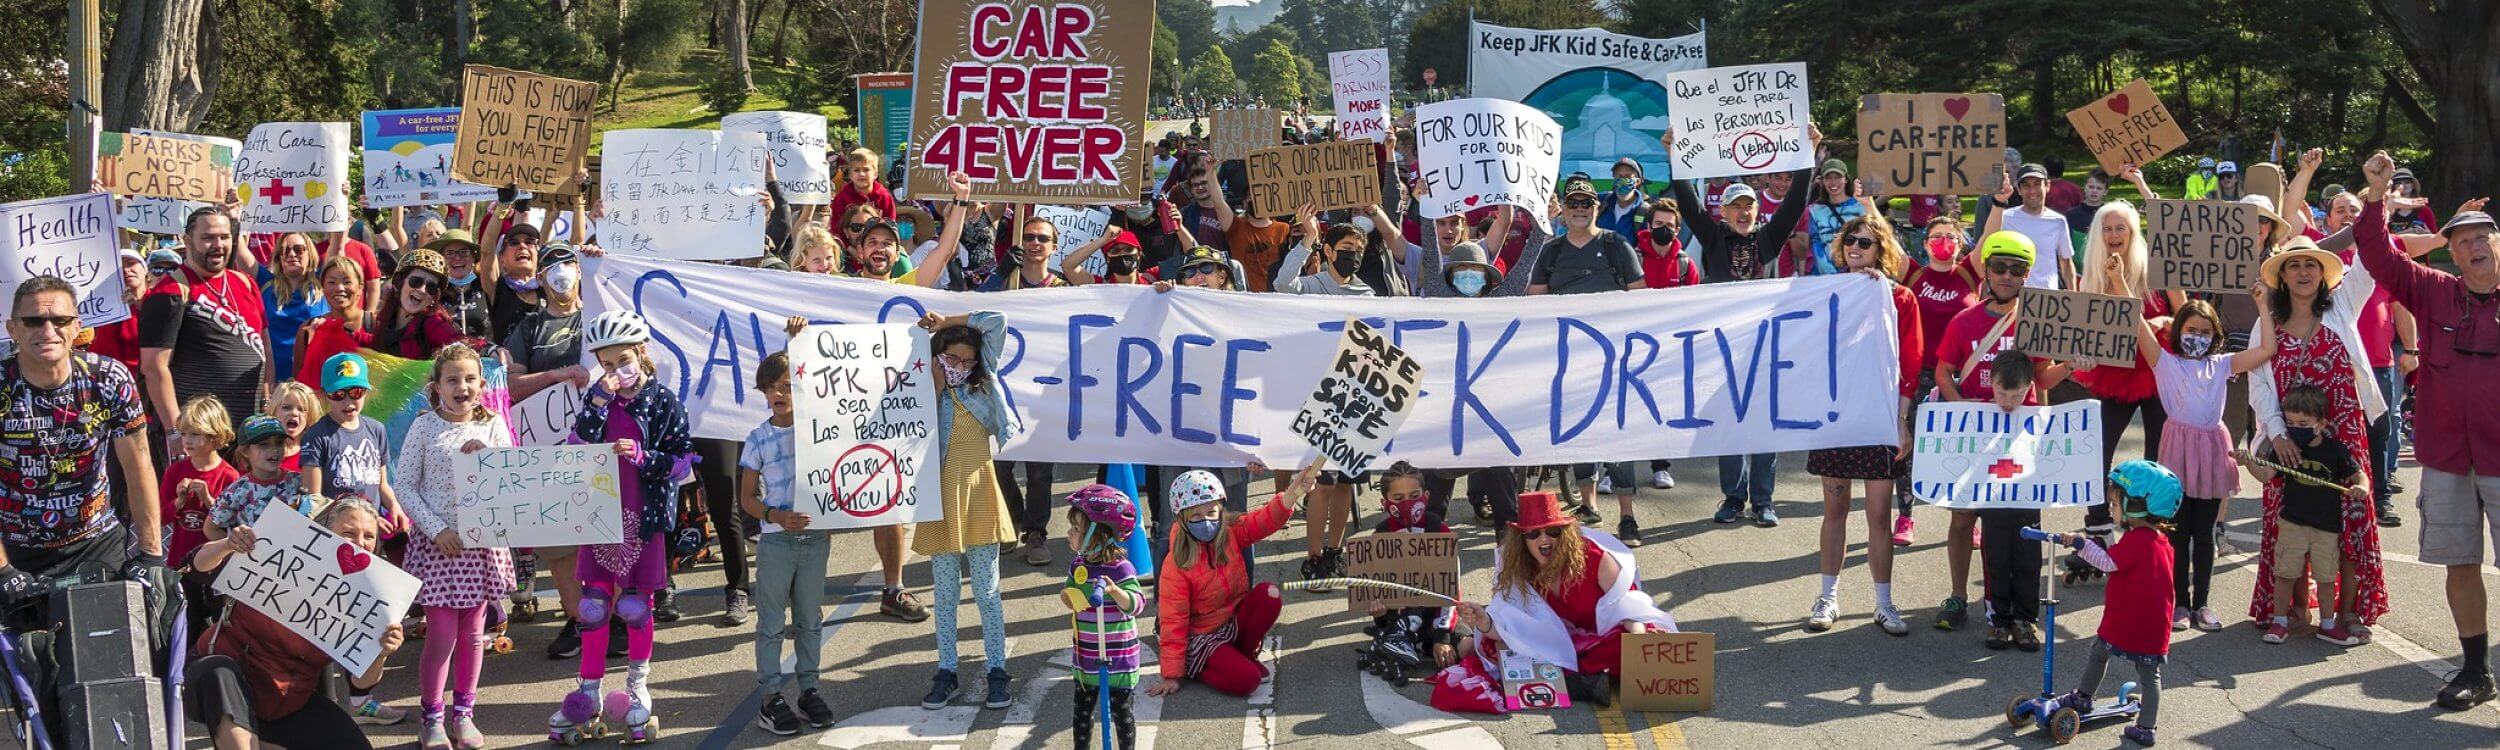 Volunteer for the Car-Free JFK Drive Campaign